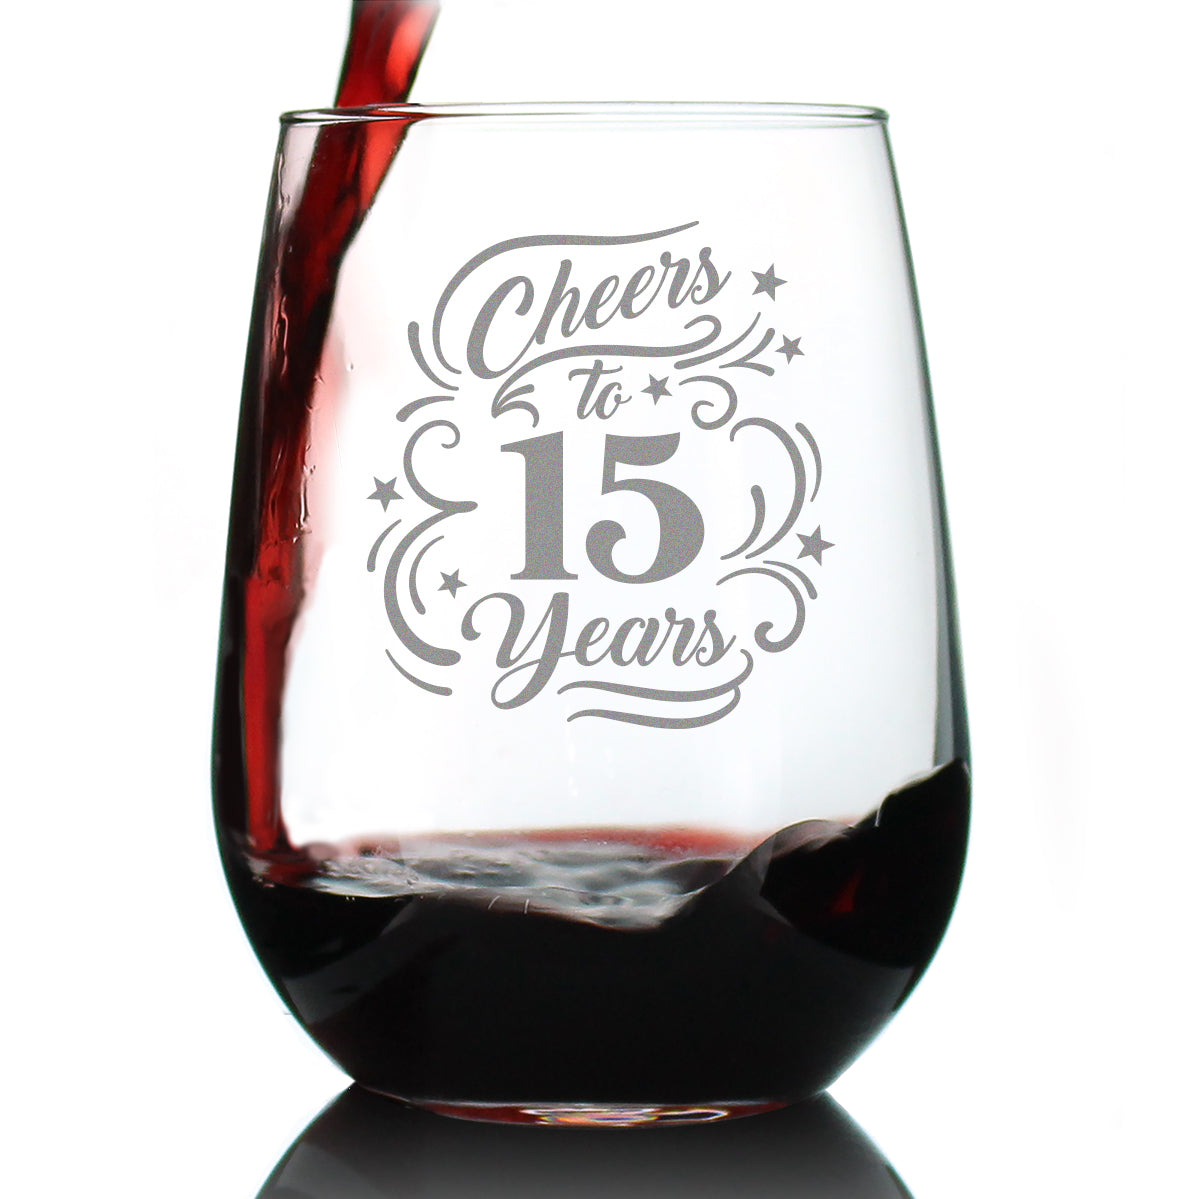 Cheers to 15 Years - Stemless Wine Glass Gifts for Women & Men - 15th Anniversary Party Decor - Large 17 Oz Glasses